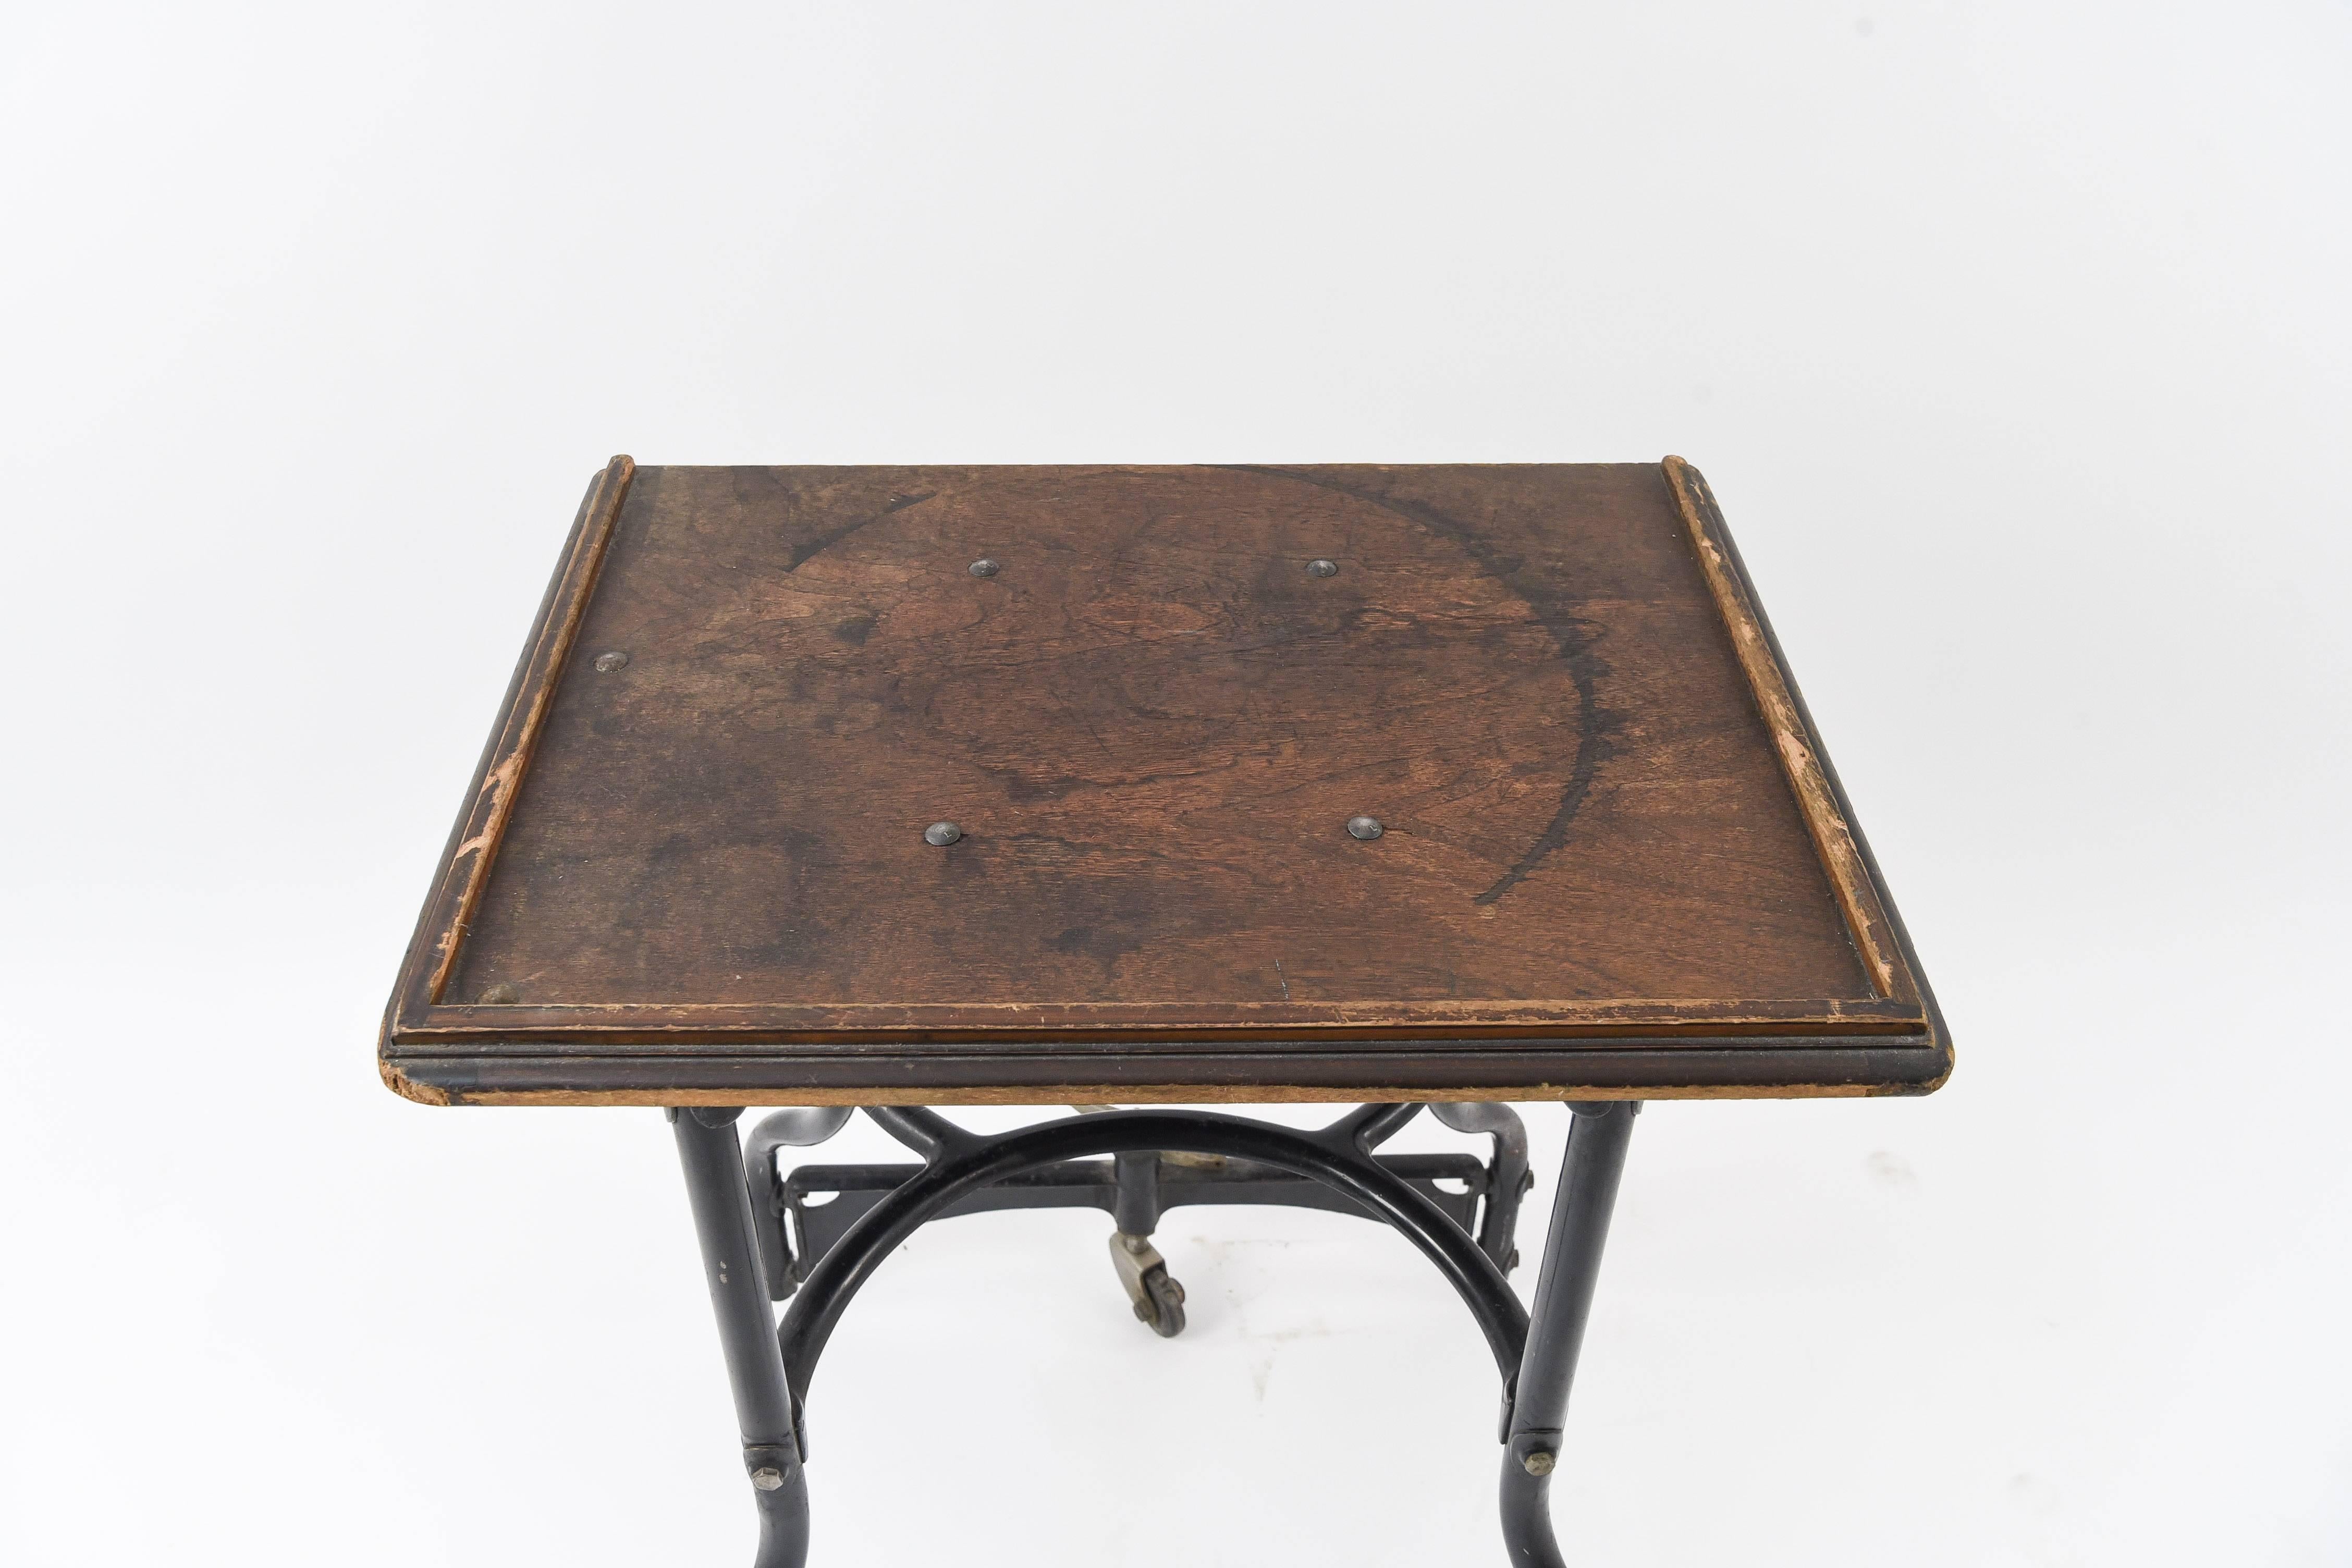 A wonderful vintage Industrial table with metal legs and a wooden top, this would be a great accent piece to any room!